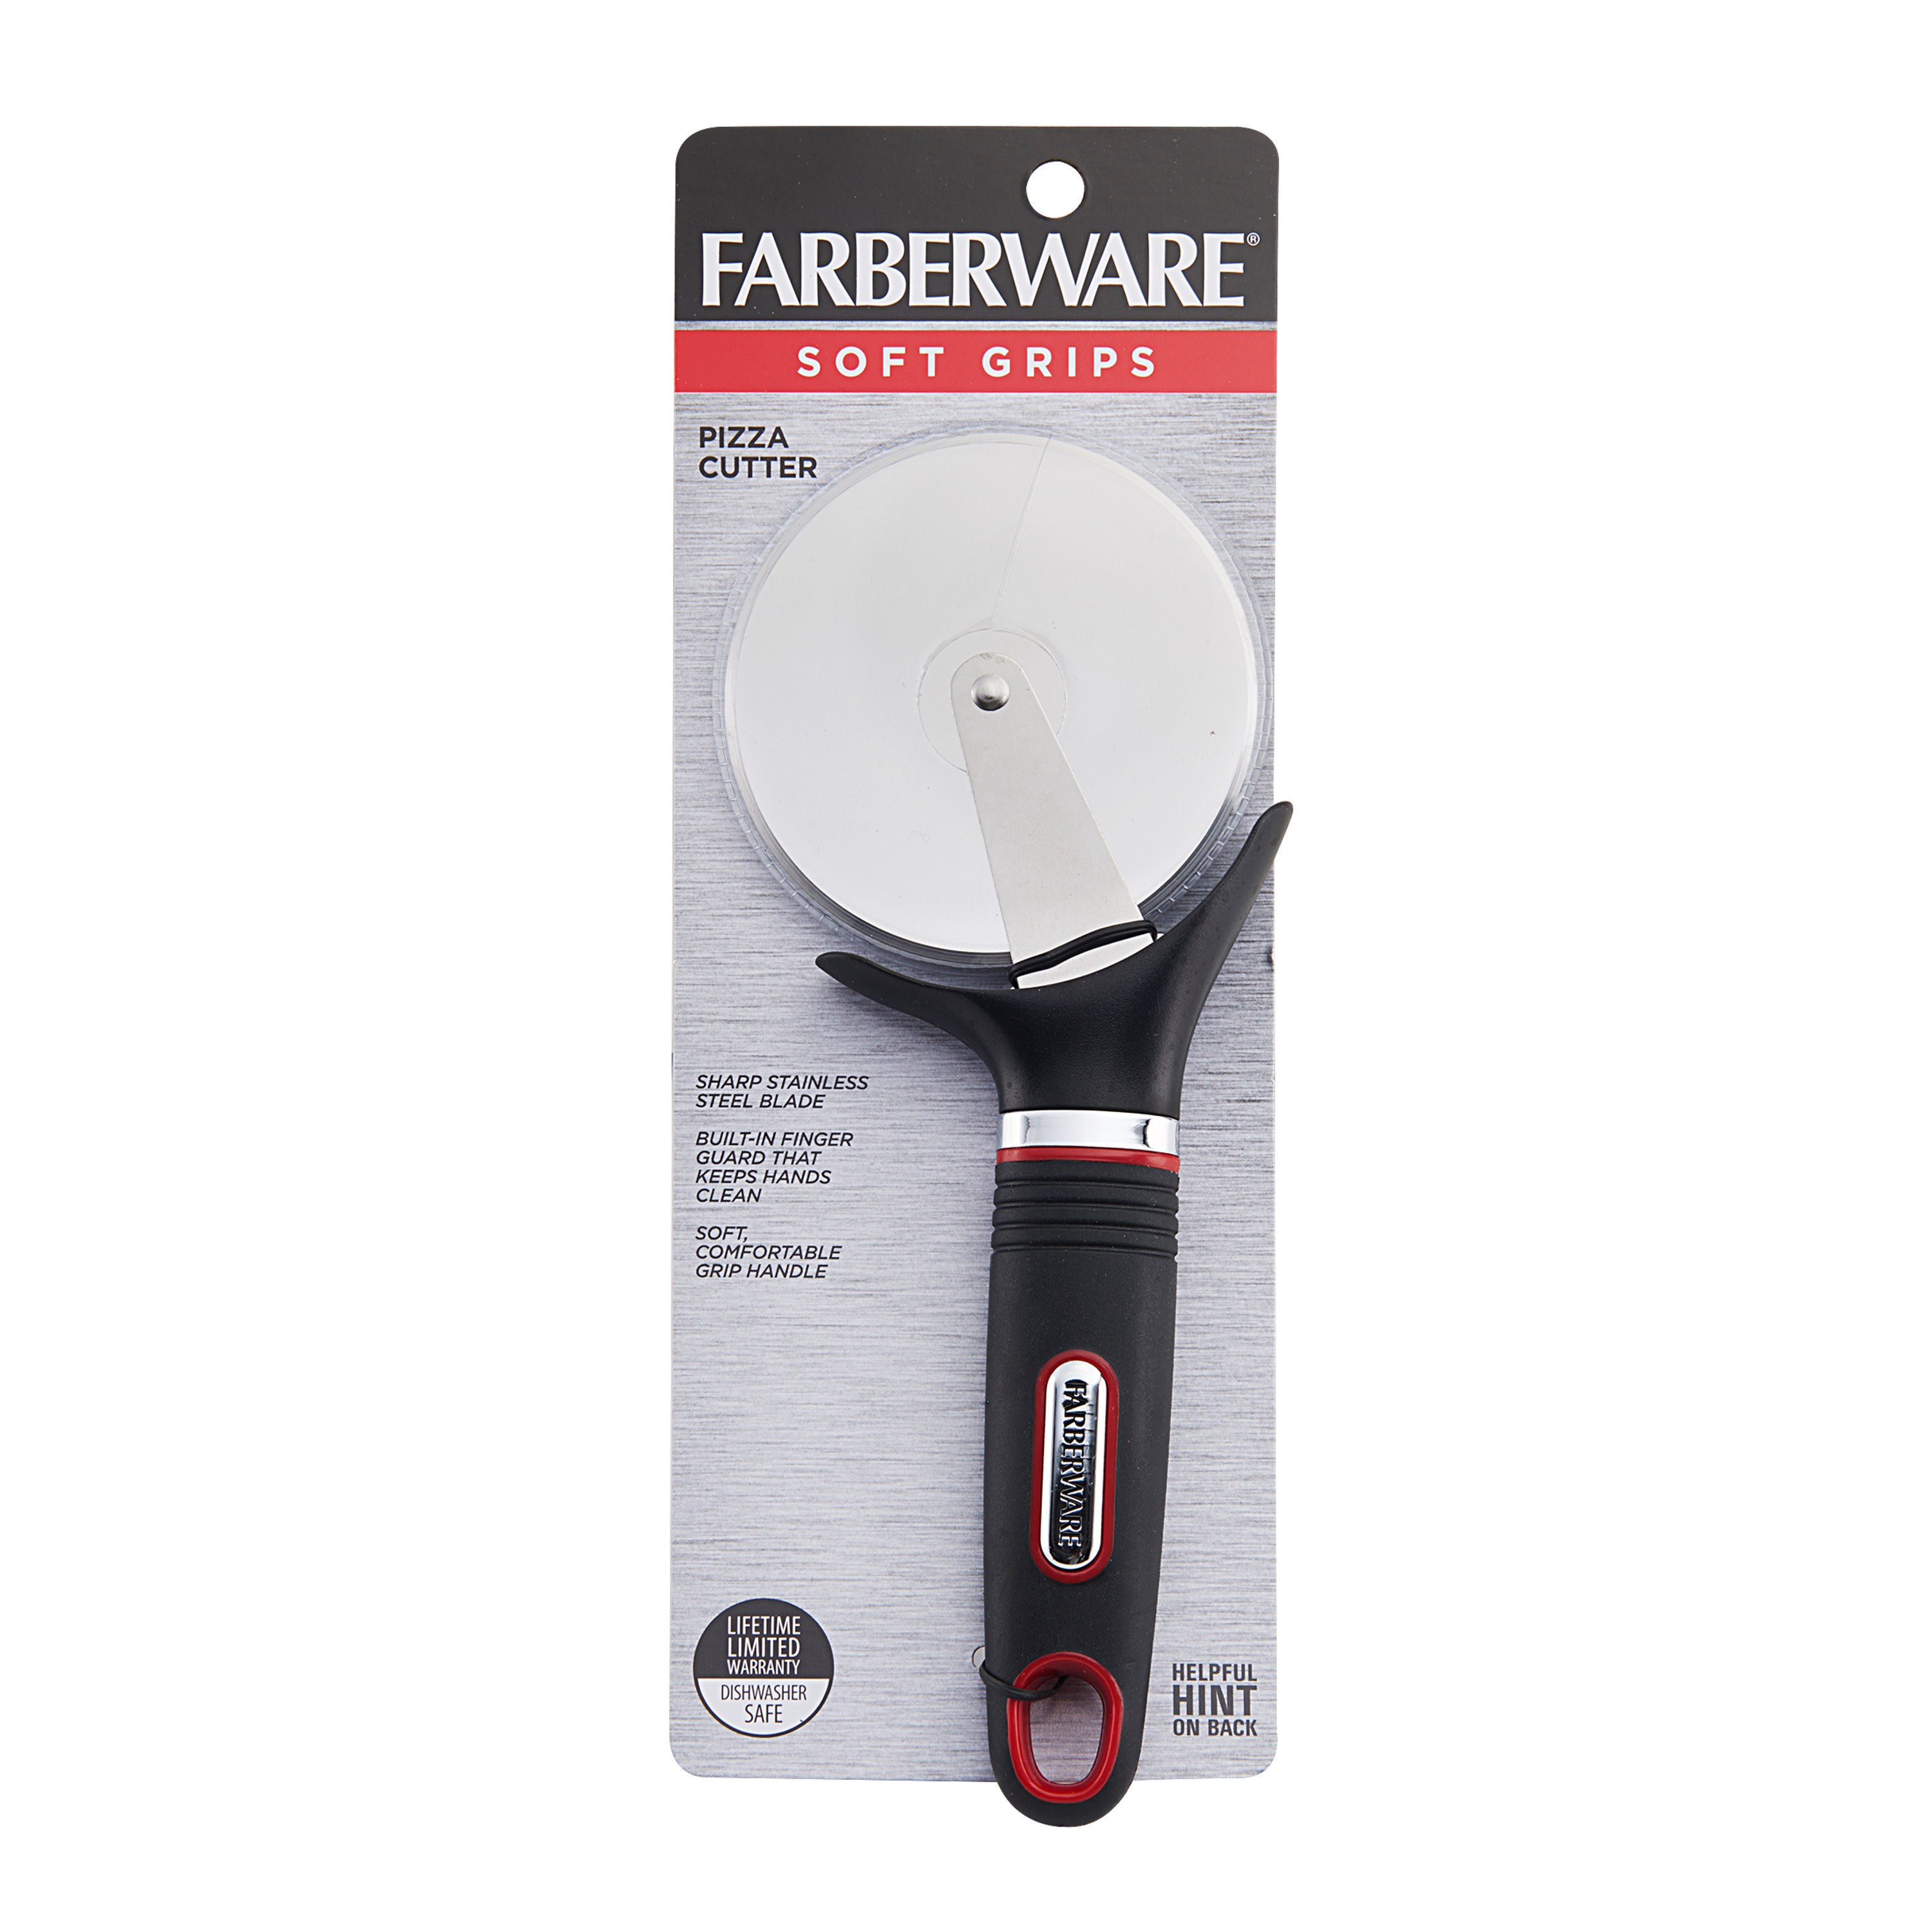 Farberware Soft Grips Pizza Cutter with Red and Black Handle - image 5 of 8